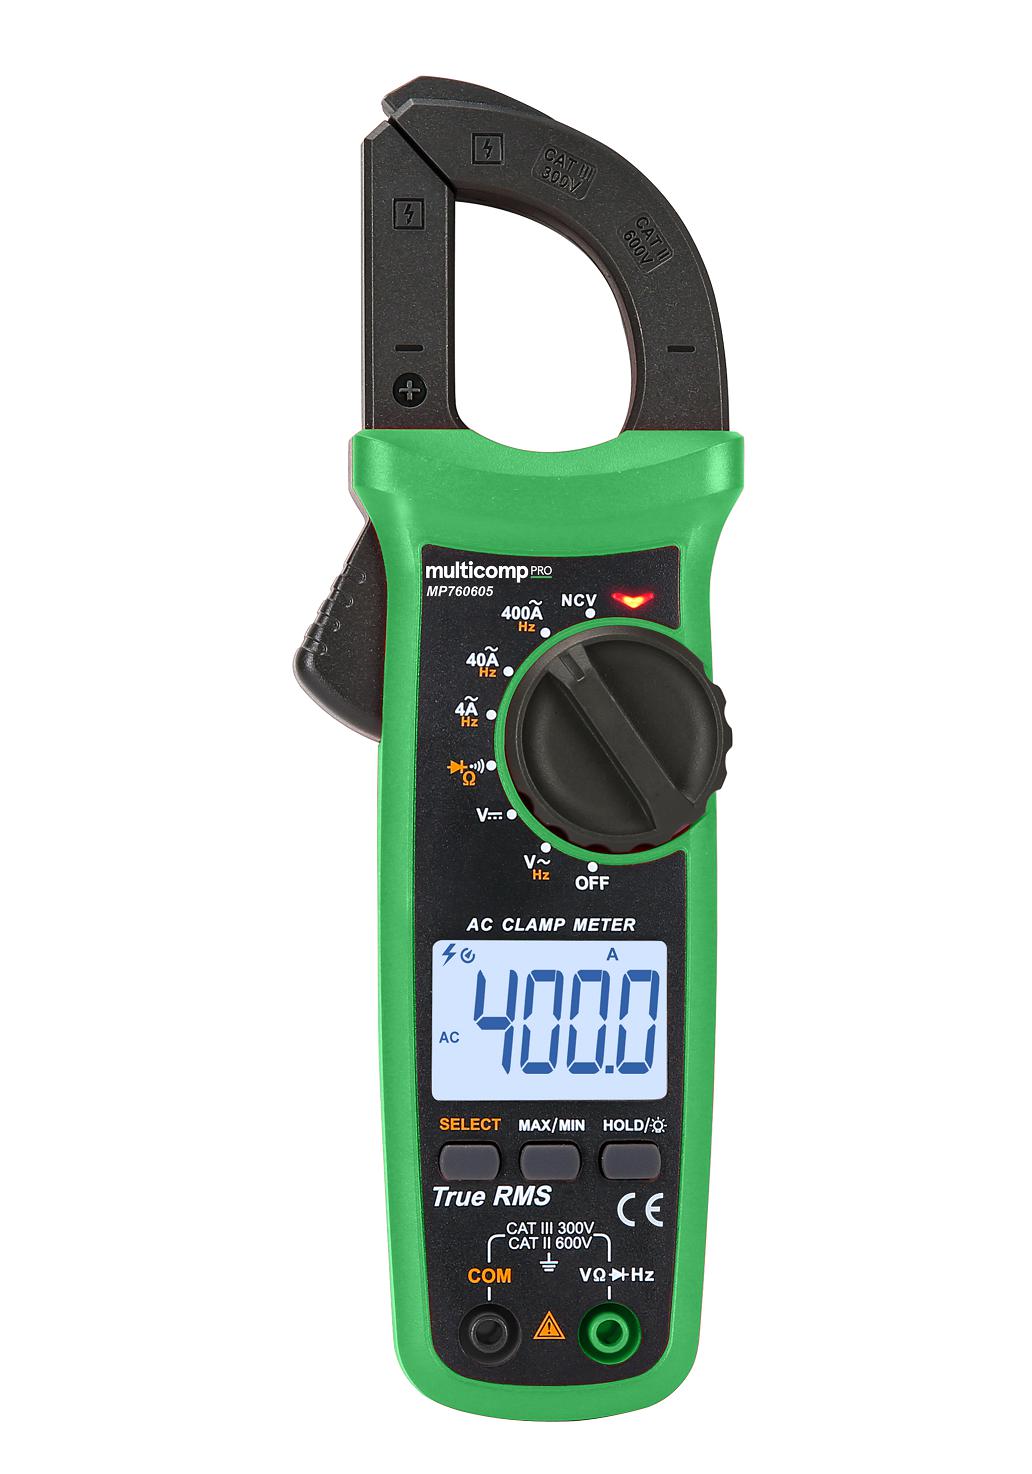 MP760605 DIG CLAMP MULTIMETER, 4000 COUNT, 400A MULTICOMP PRO